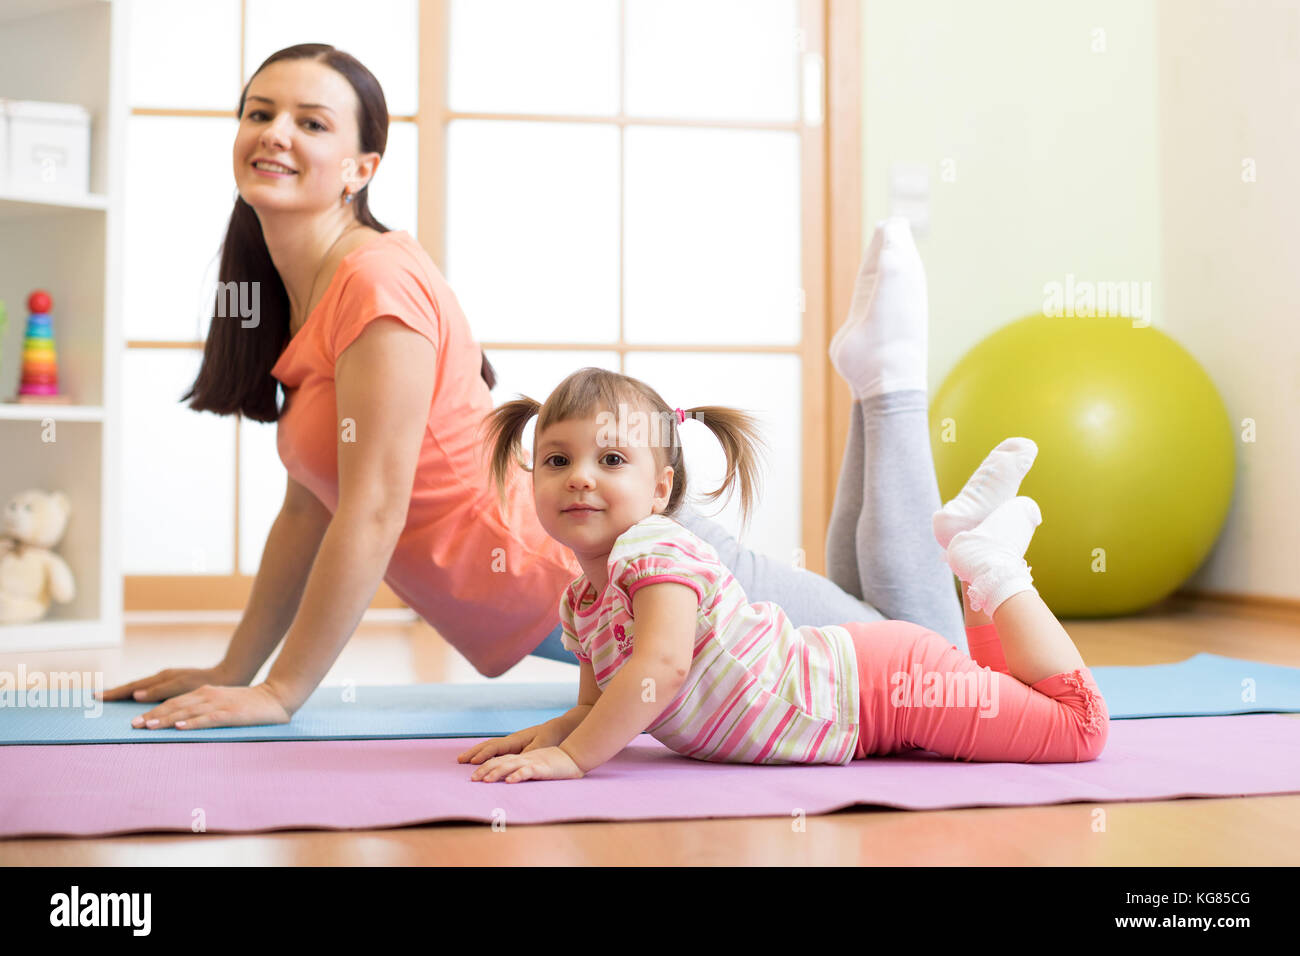 Mother and child daughter doing yoga exercises on floor in room at home. Family having fun indoors with fitness. Stock Photo